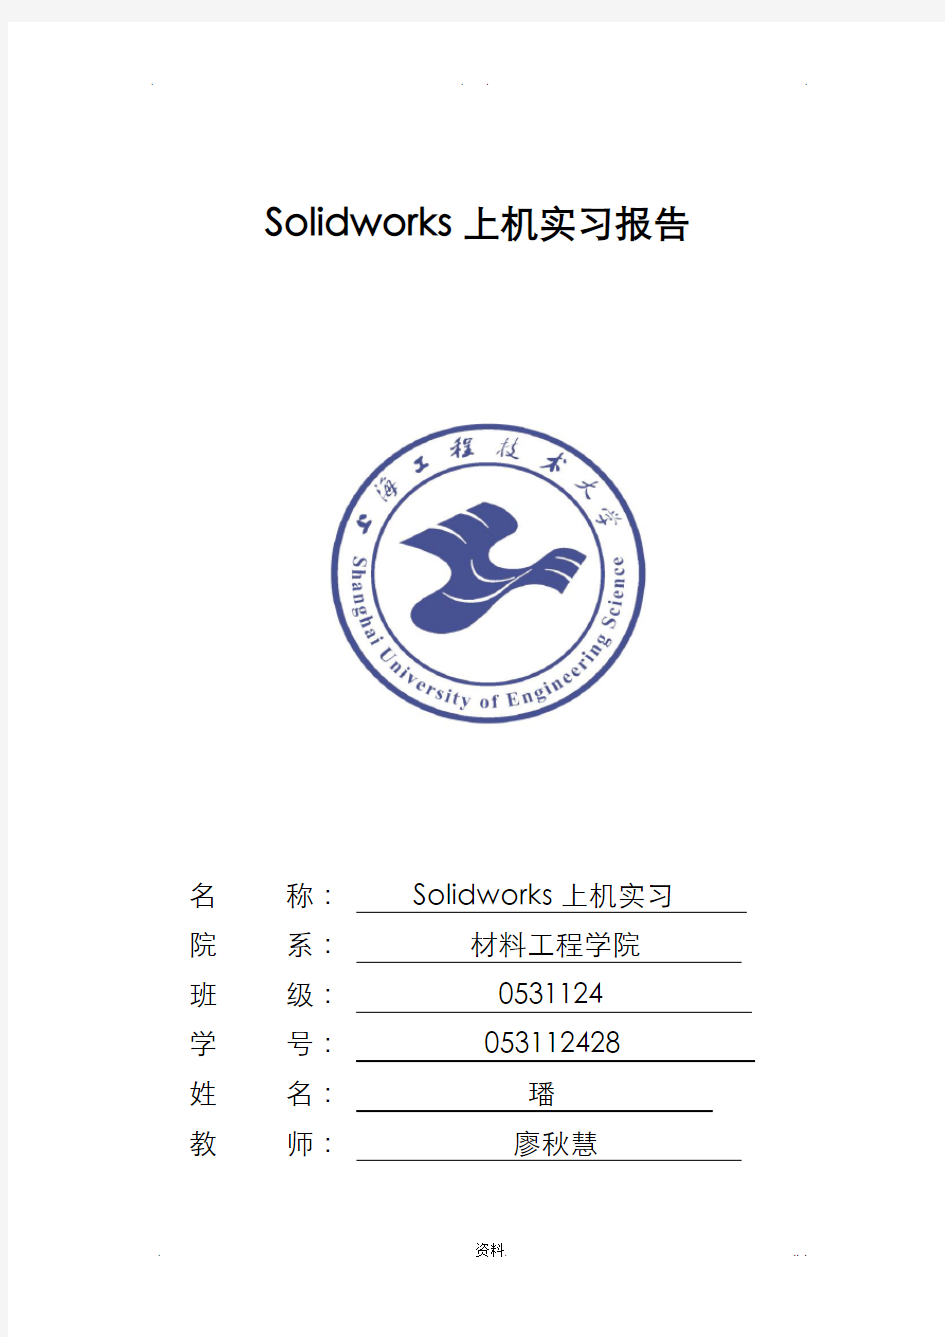 Solidworks实习报告